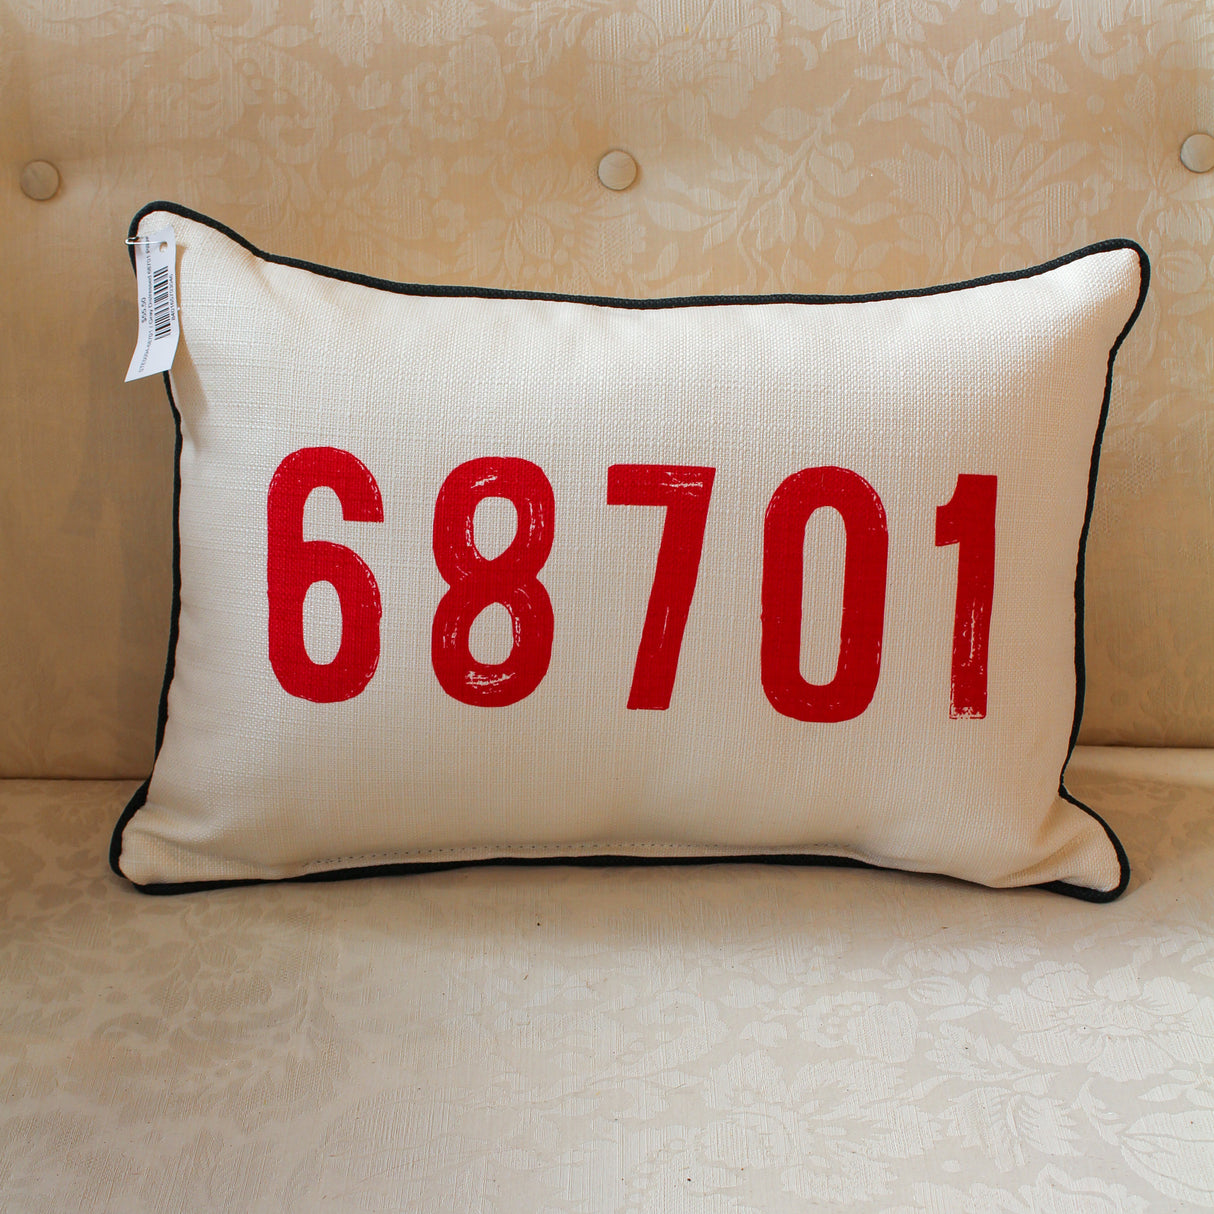 Red 68701 Pillow